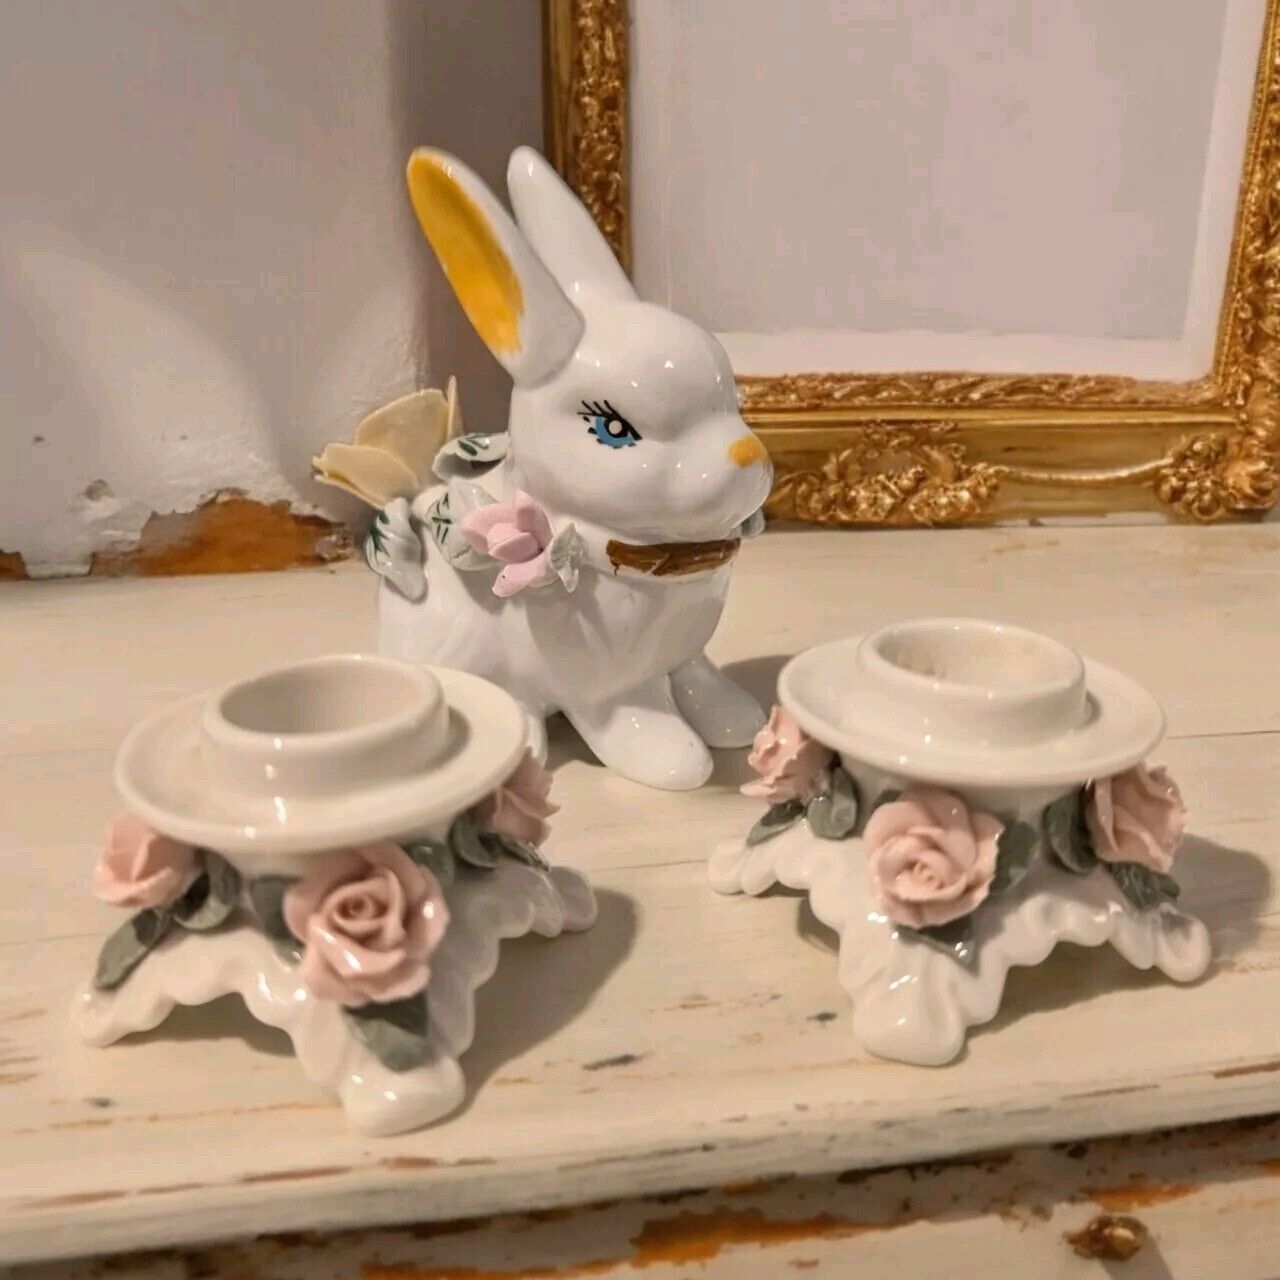 Vintage Dresdon Porcelain Candle Holders(2) & Hand Painted Bunny Figurine Roses 